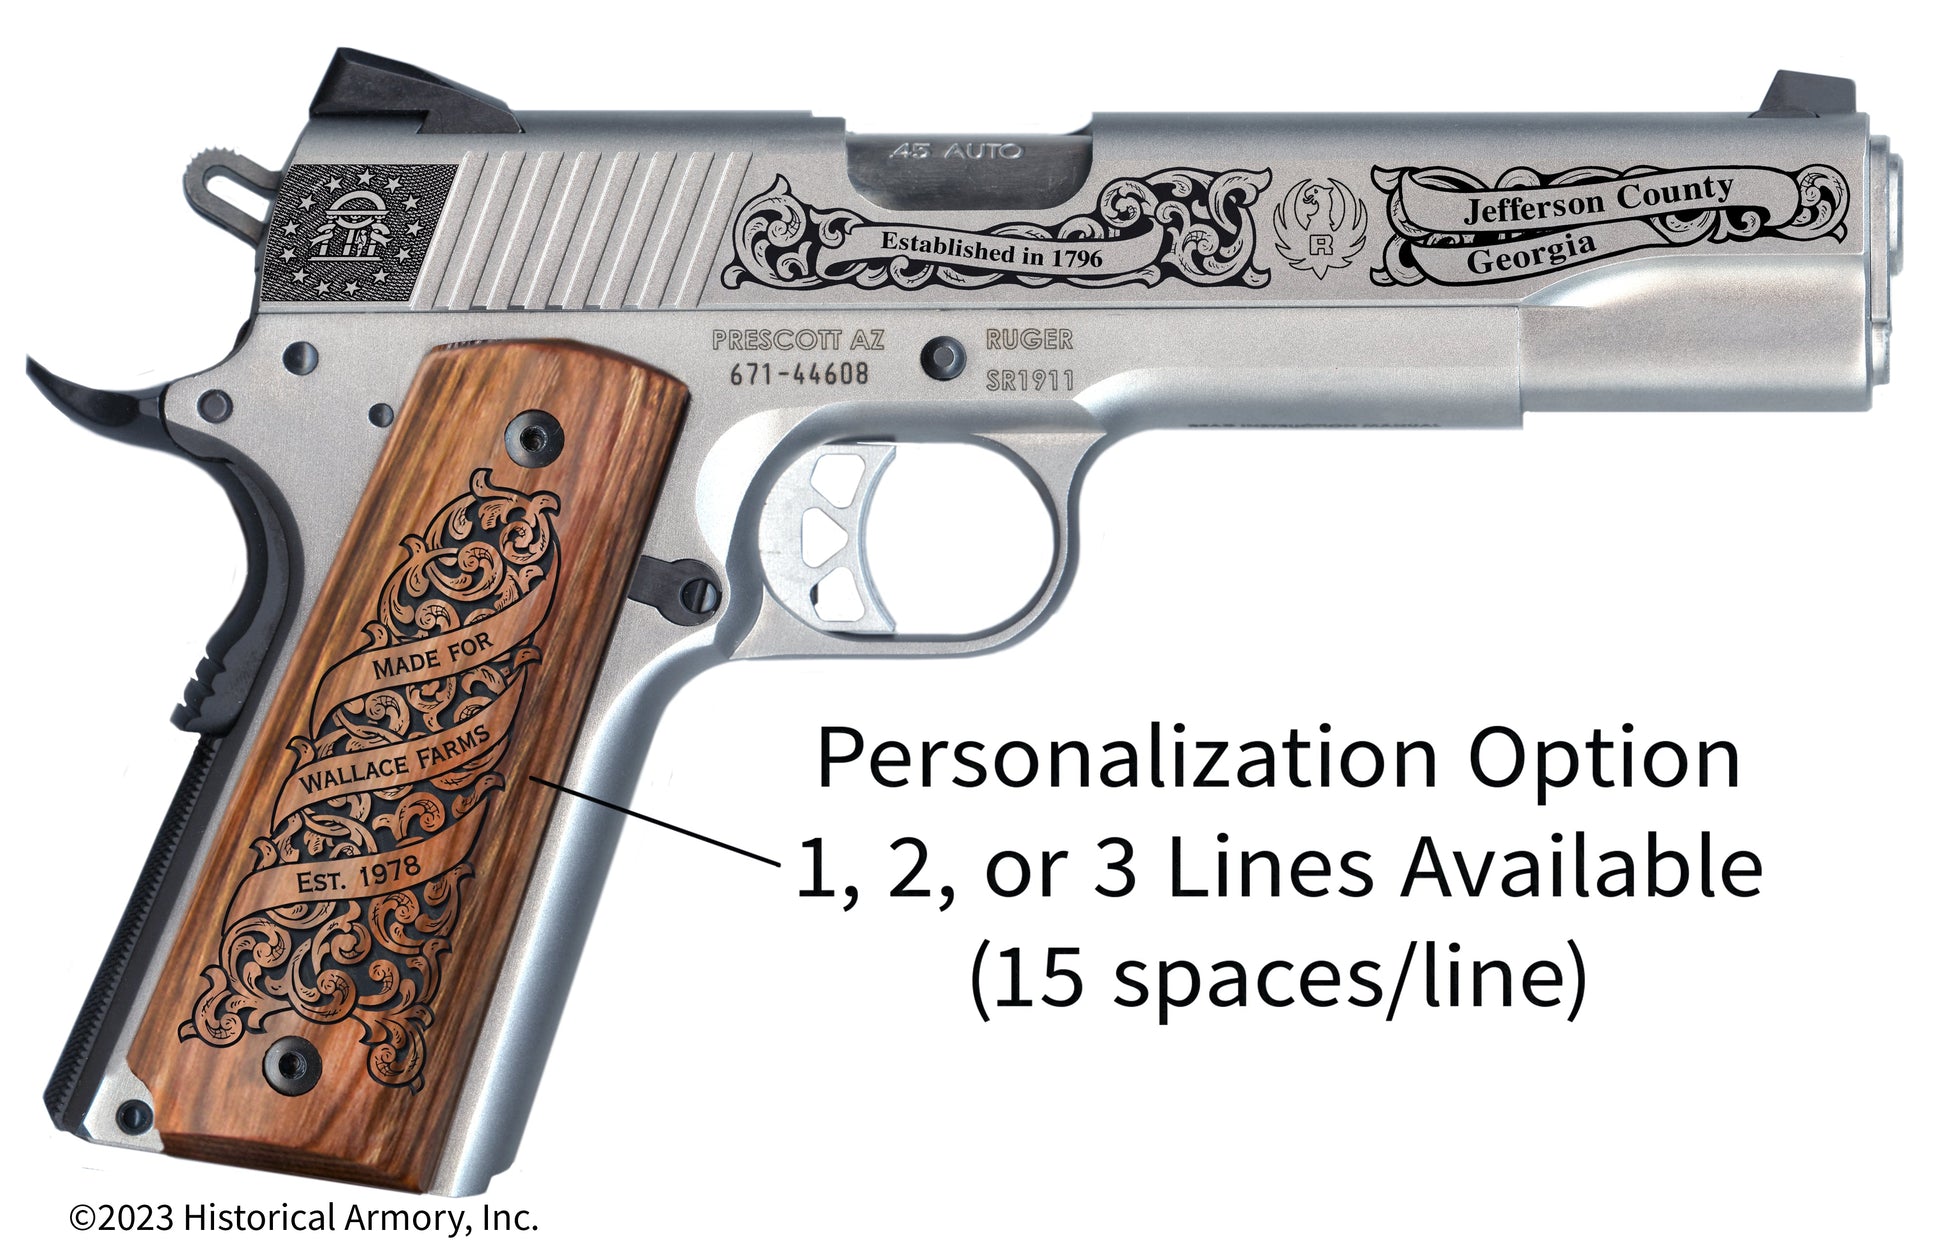 Jefferson County Georgia Personalized Engraved .45 Auto Ruger 1911